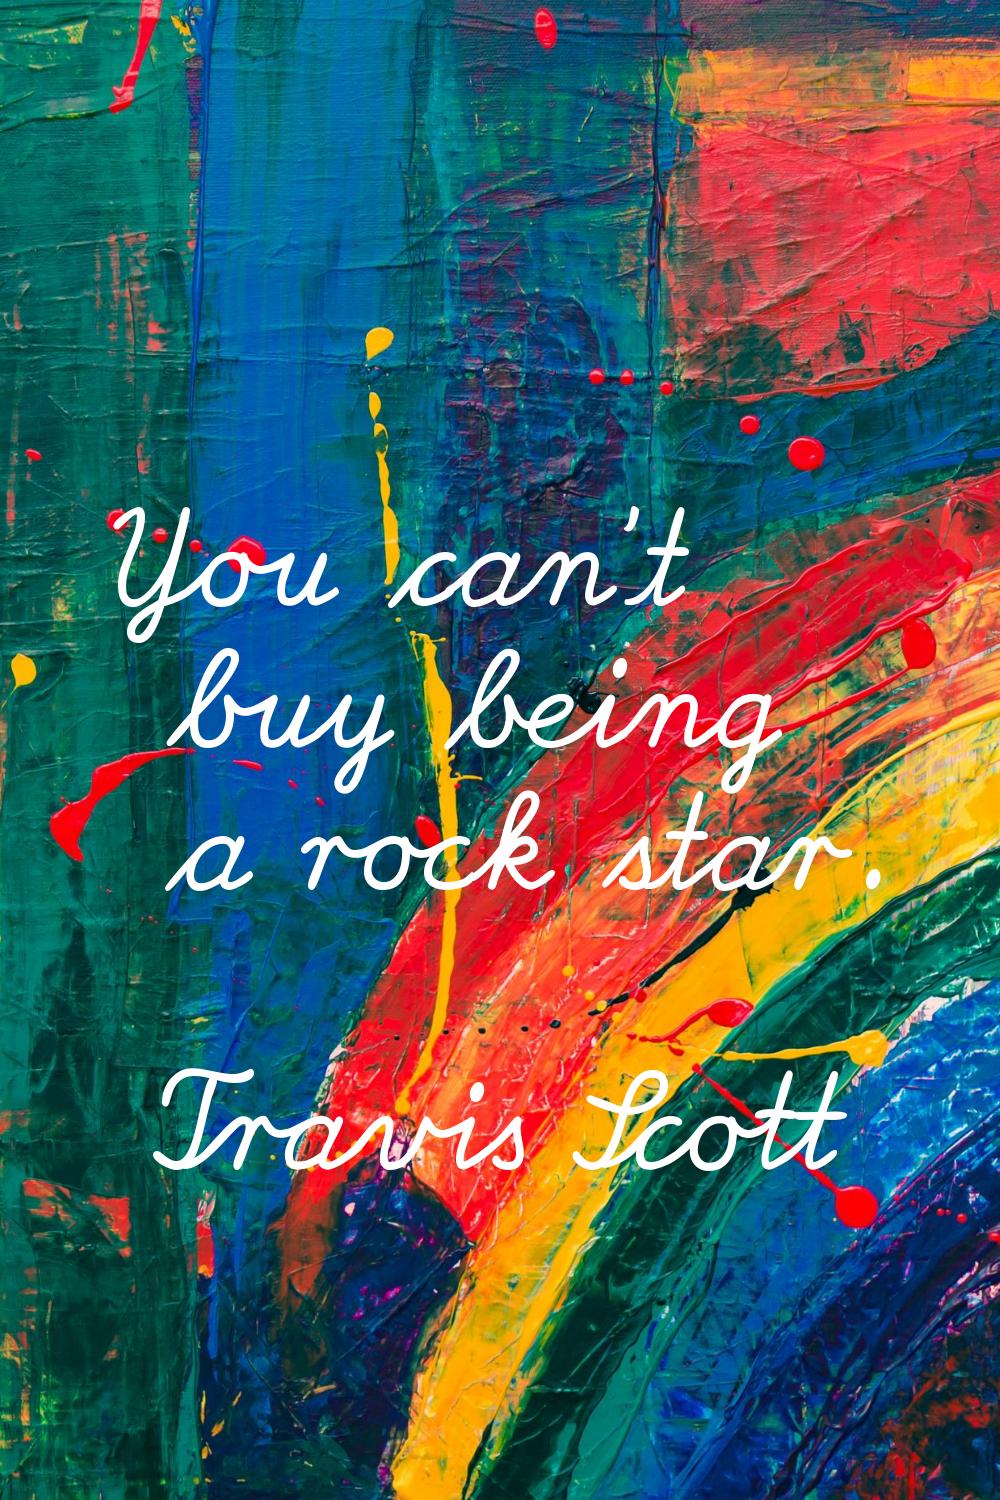 You can't buy being a rock star.